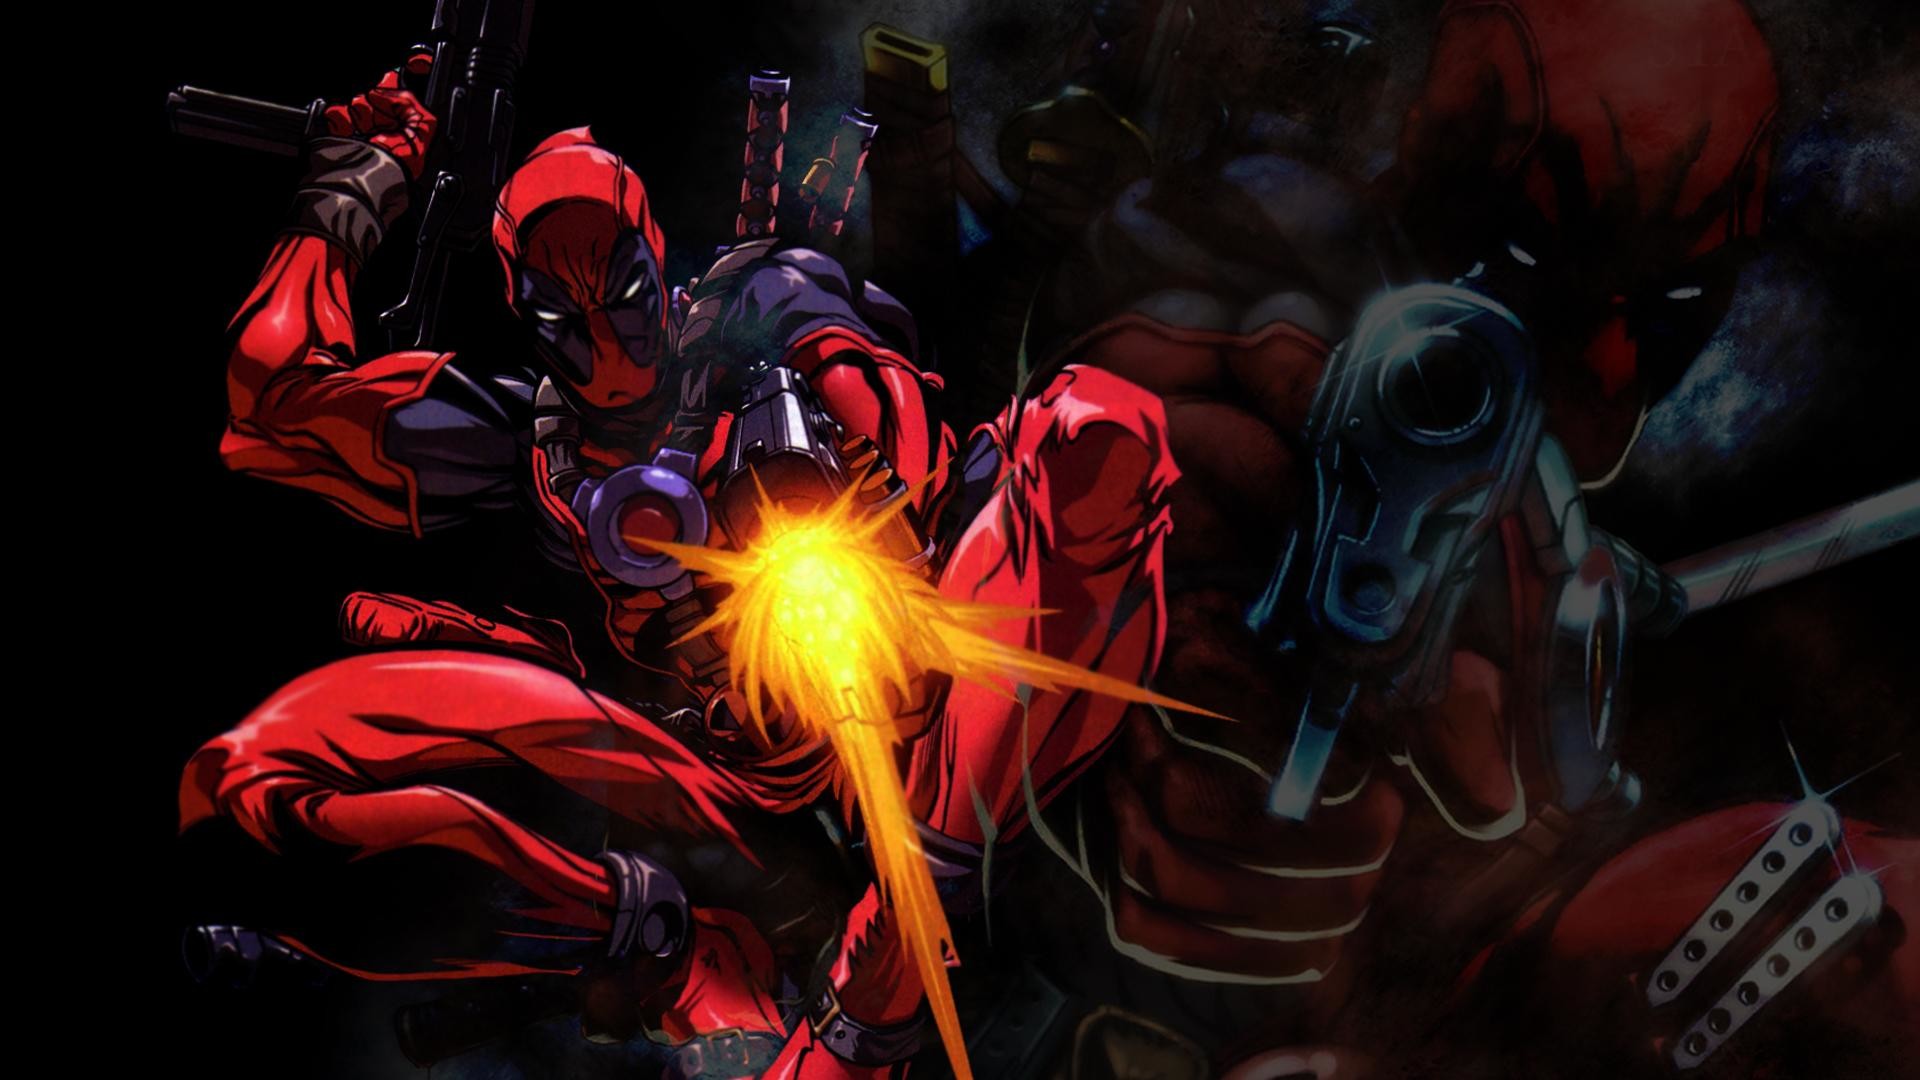 1920x1080 PS3 Themes Â» Search results for "deadpool" ...